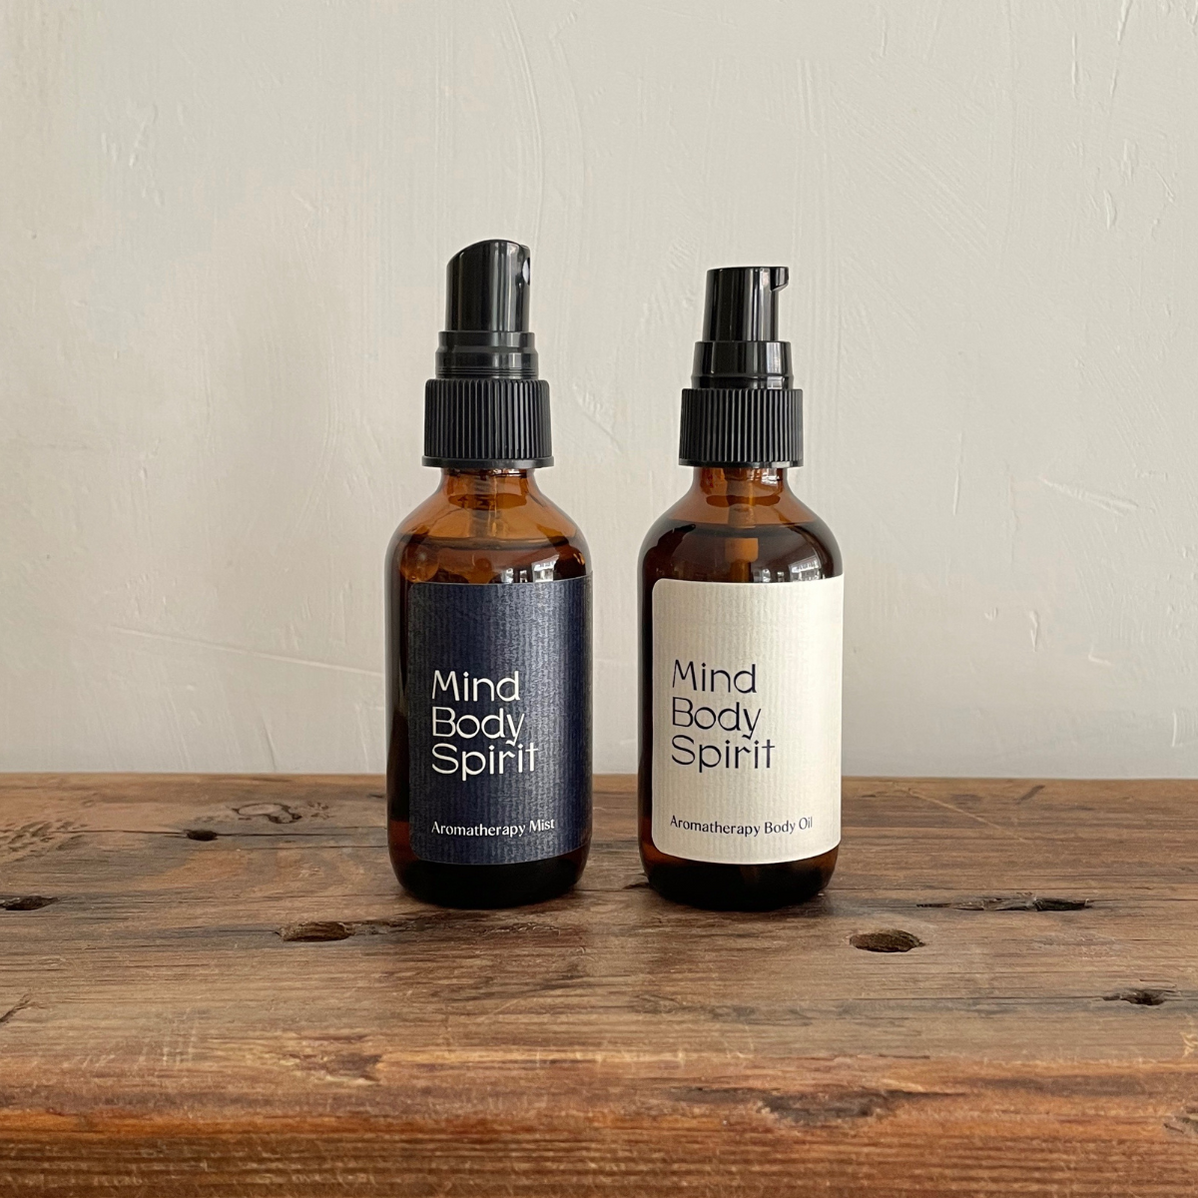 species by the thousands / Mind Body Spirit body oil's sense of center originates from an integrative blend of palo santo, frankincense, patchouli, lavender and clary sage scent. Can help promote a healthy sense of balance and transform the moment into something sacred and holistic. 